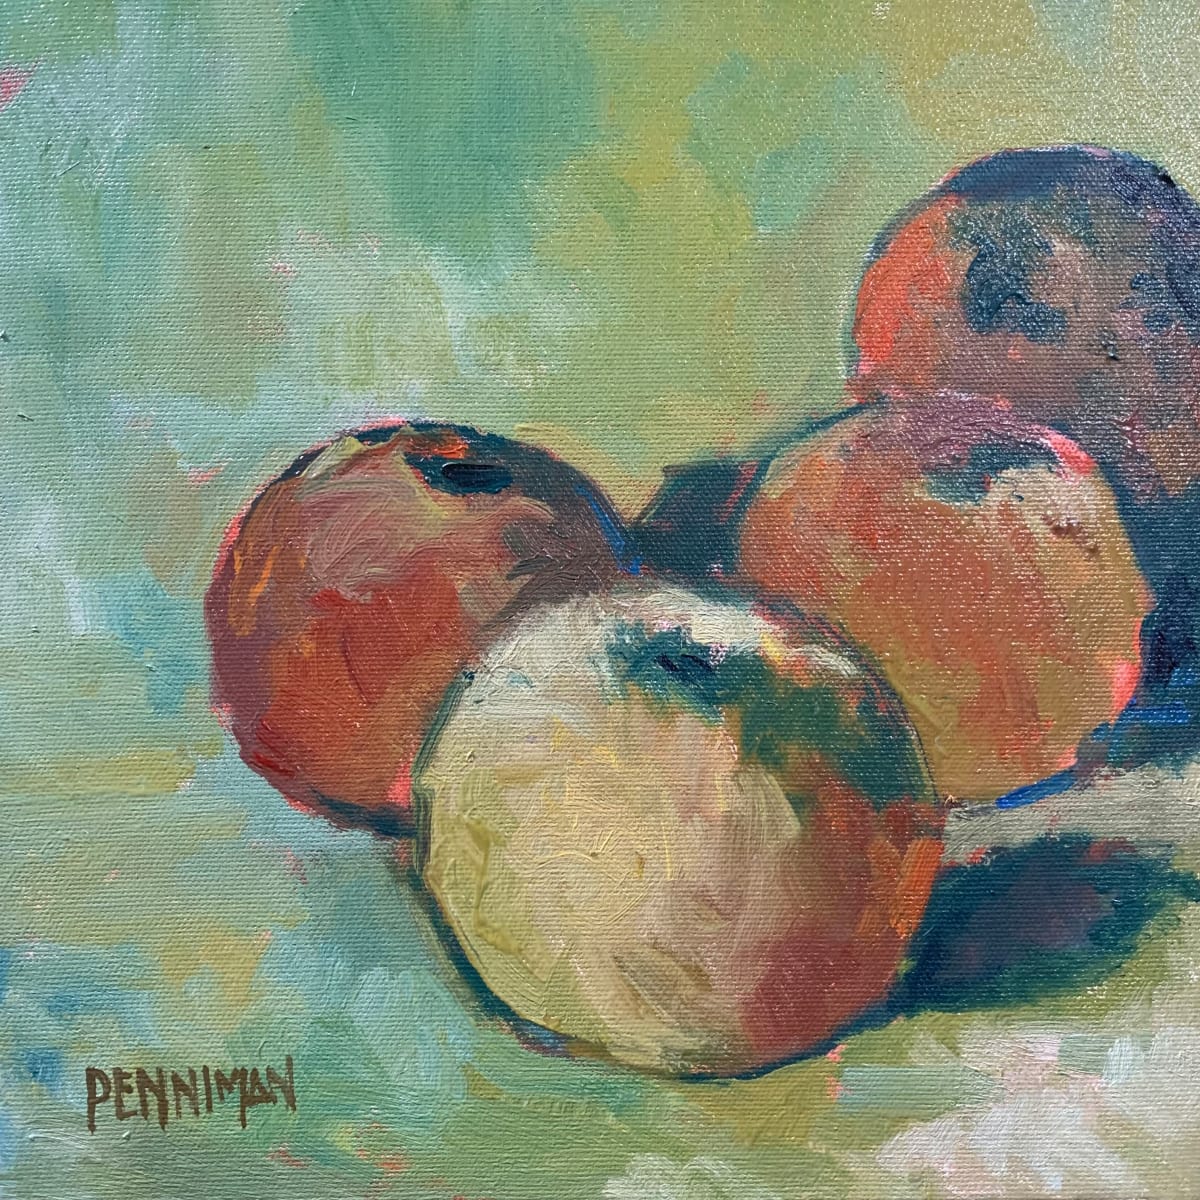 Cézanne's Apples I by Ed Penniman  Image: Exploring Cezanne's color and brushwork